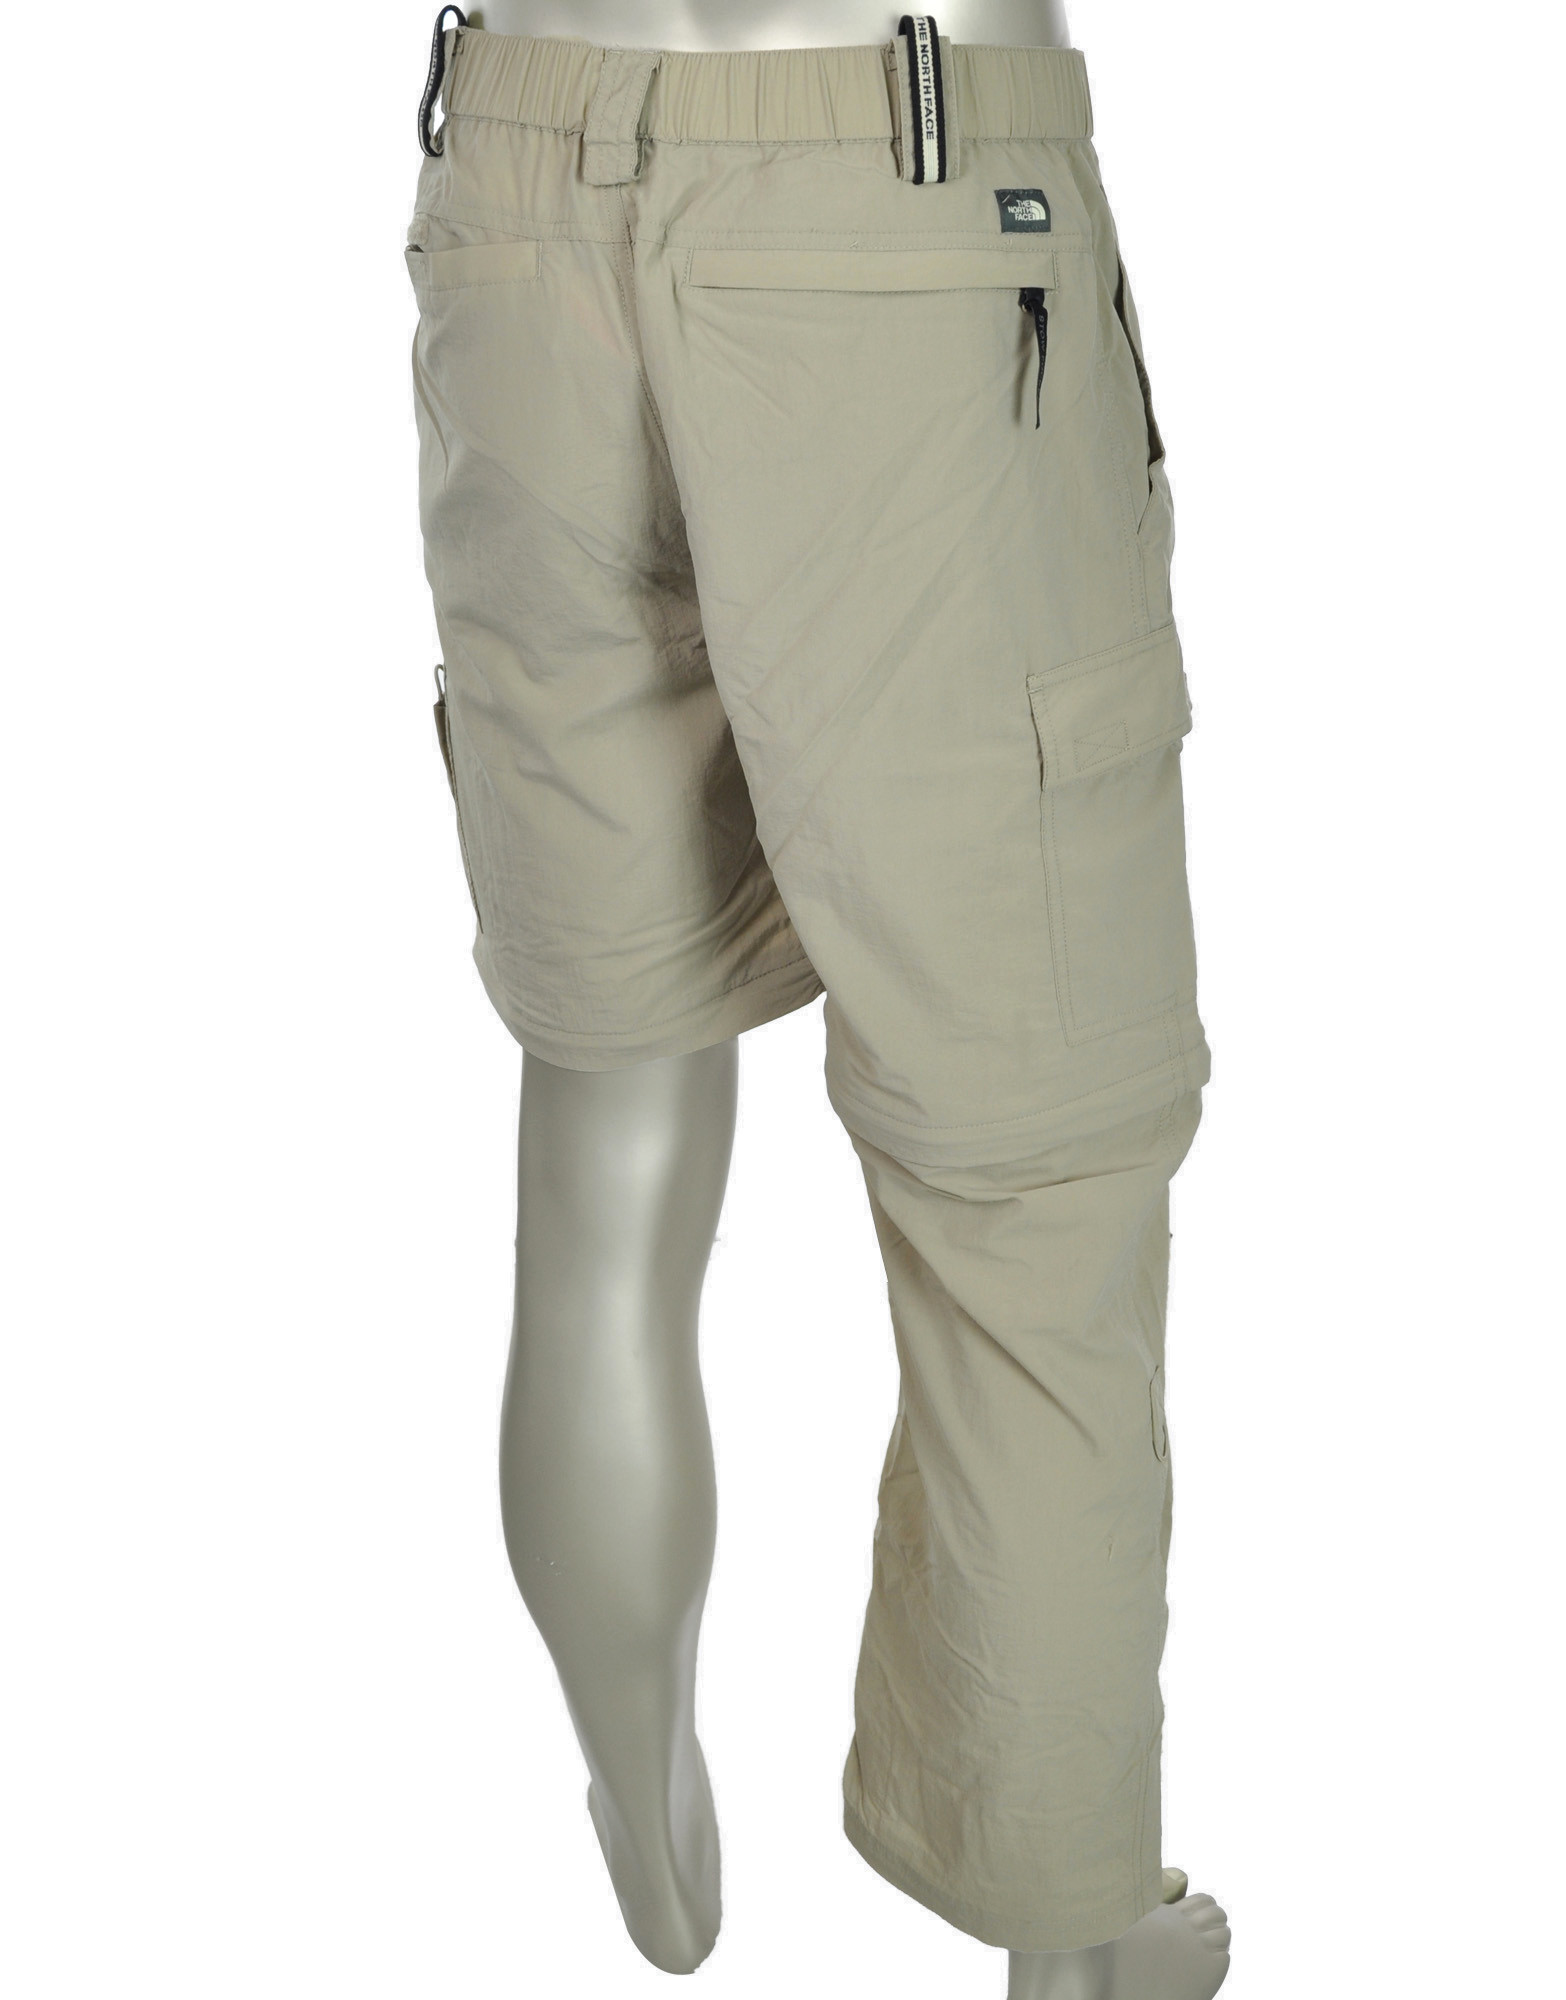 M Meridian Convertible Pant by The 